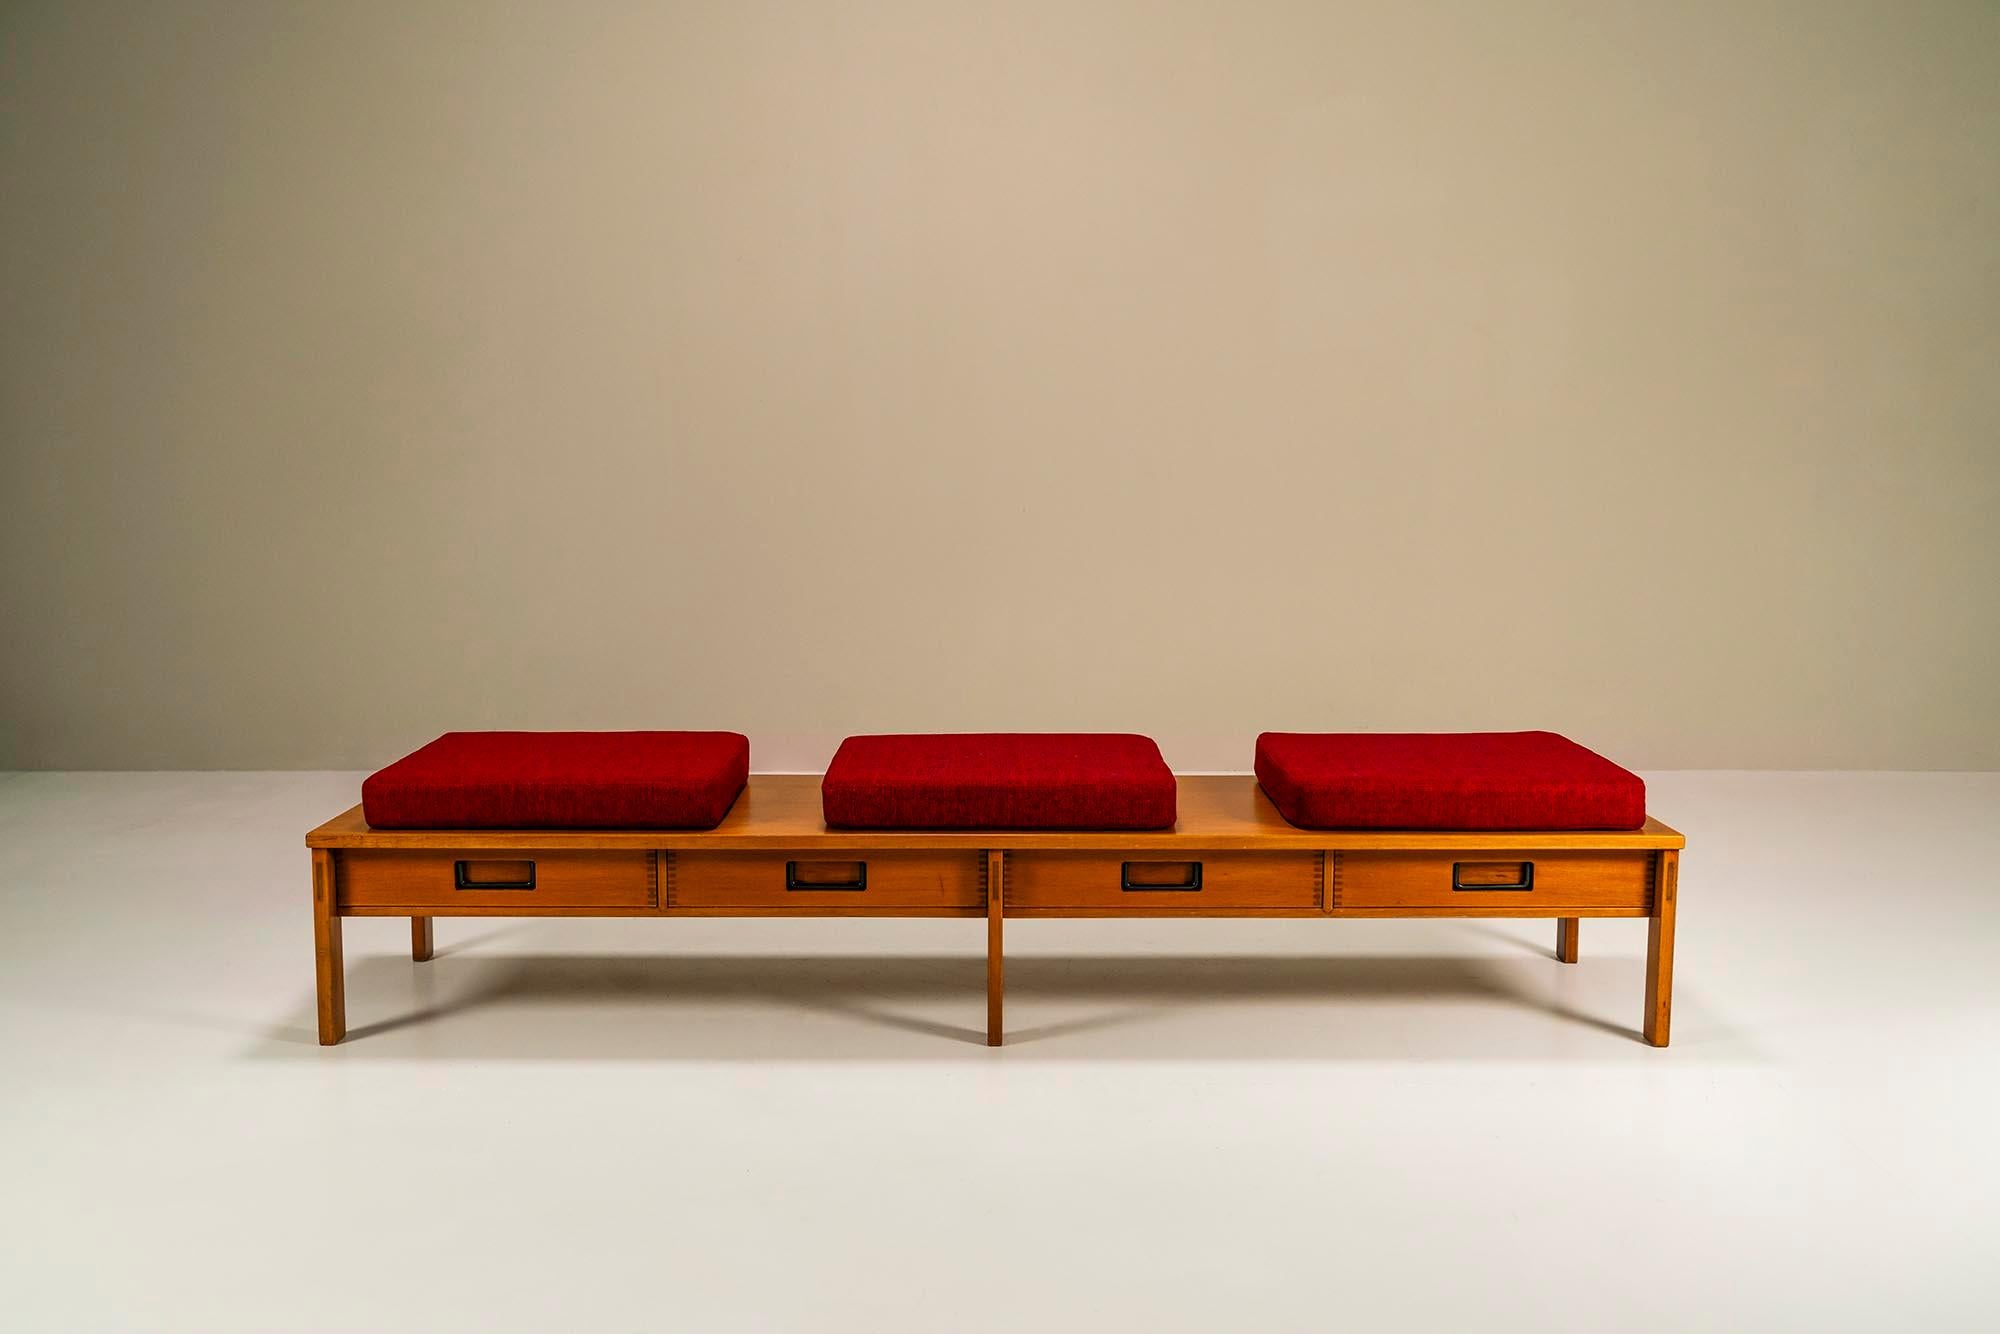 In the period 1957 and 1957, Gianfranco Frattini designed complete furniture for the, also Italian, label Cantieri Carugati. He partly completed this together with the designer Franco Bettonica and was progressive due to the sleek shapes, lightness,